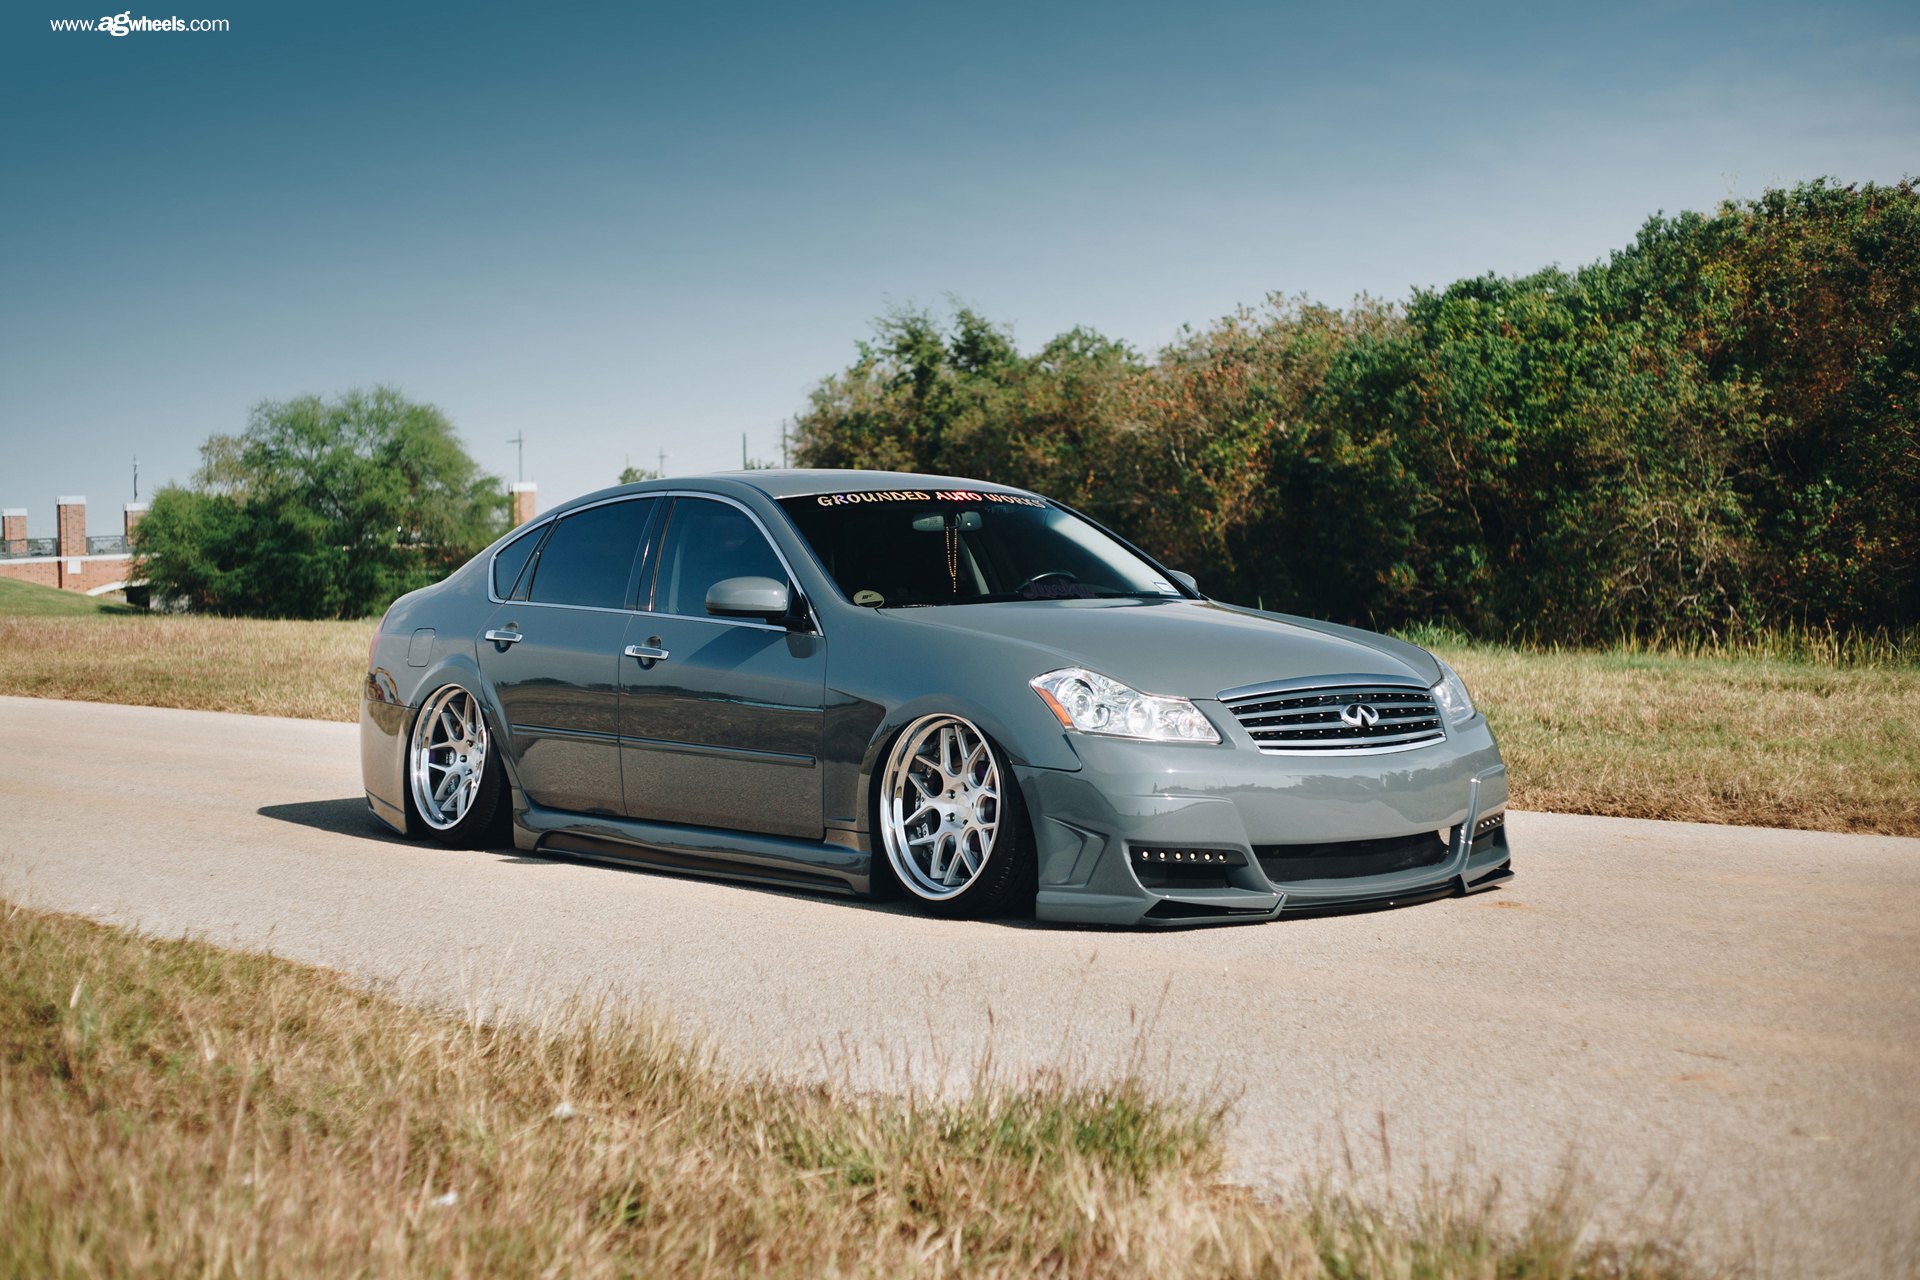 Chrome Grille on Gray Stanced Infiniti M35 - Photo by Avant Garde Wheels